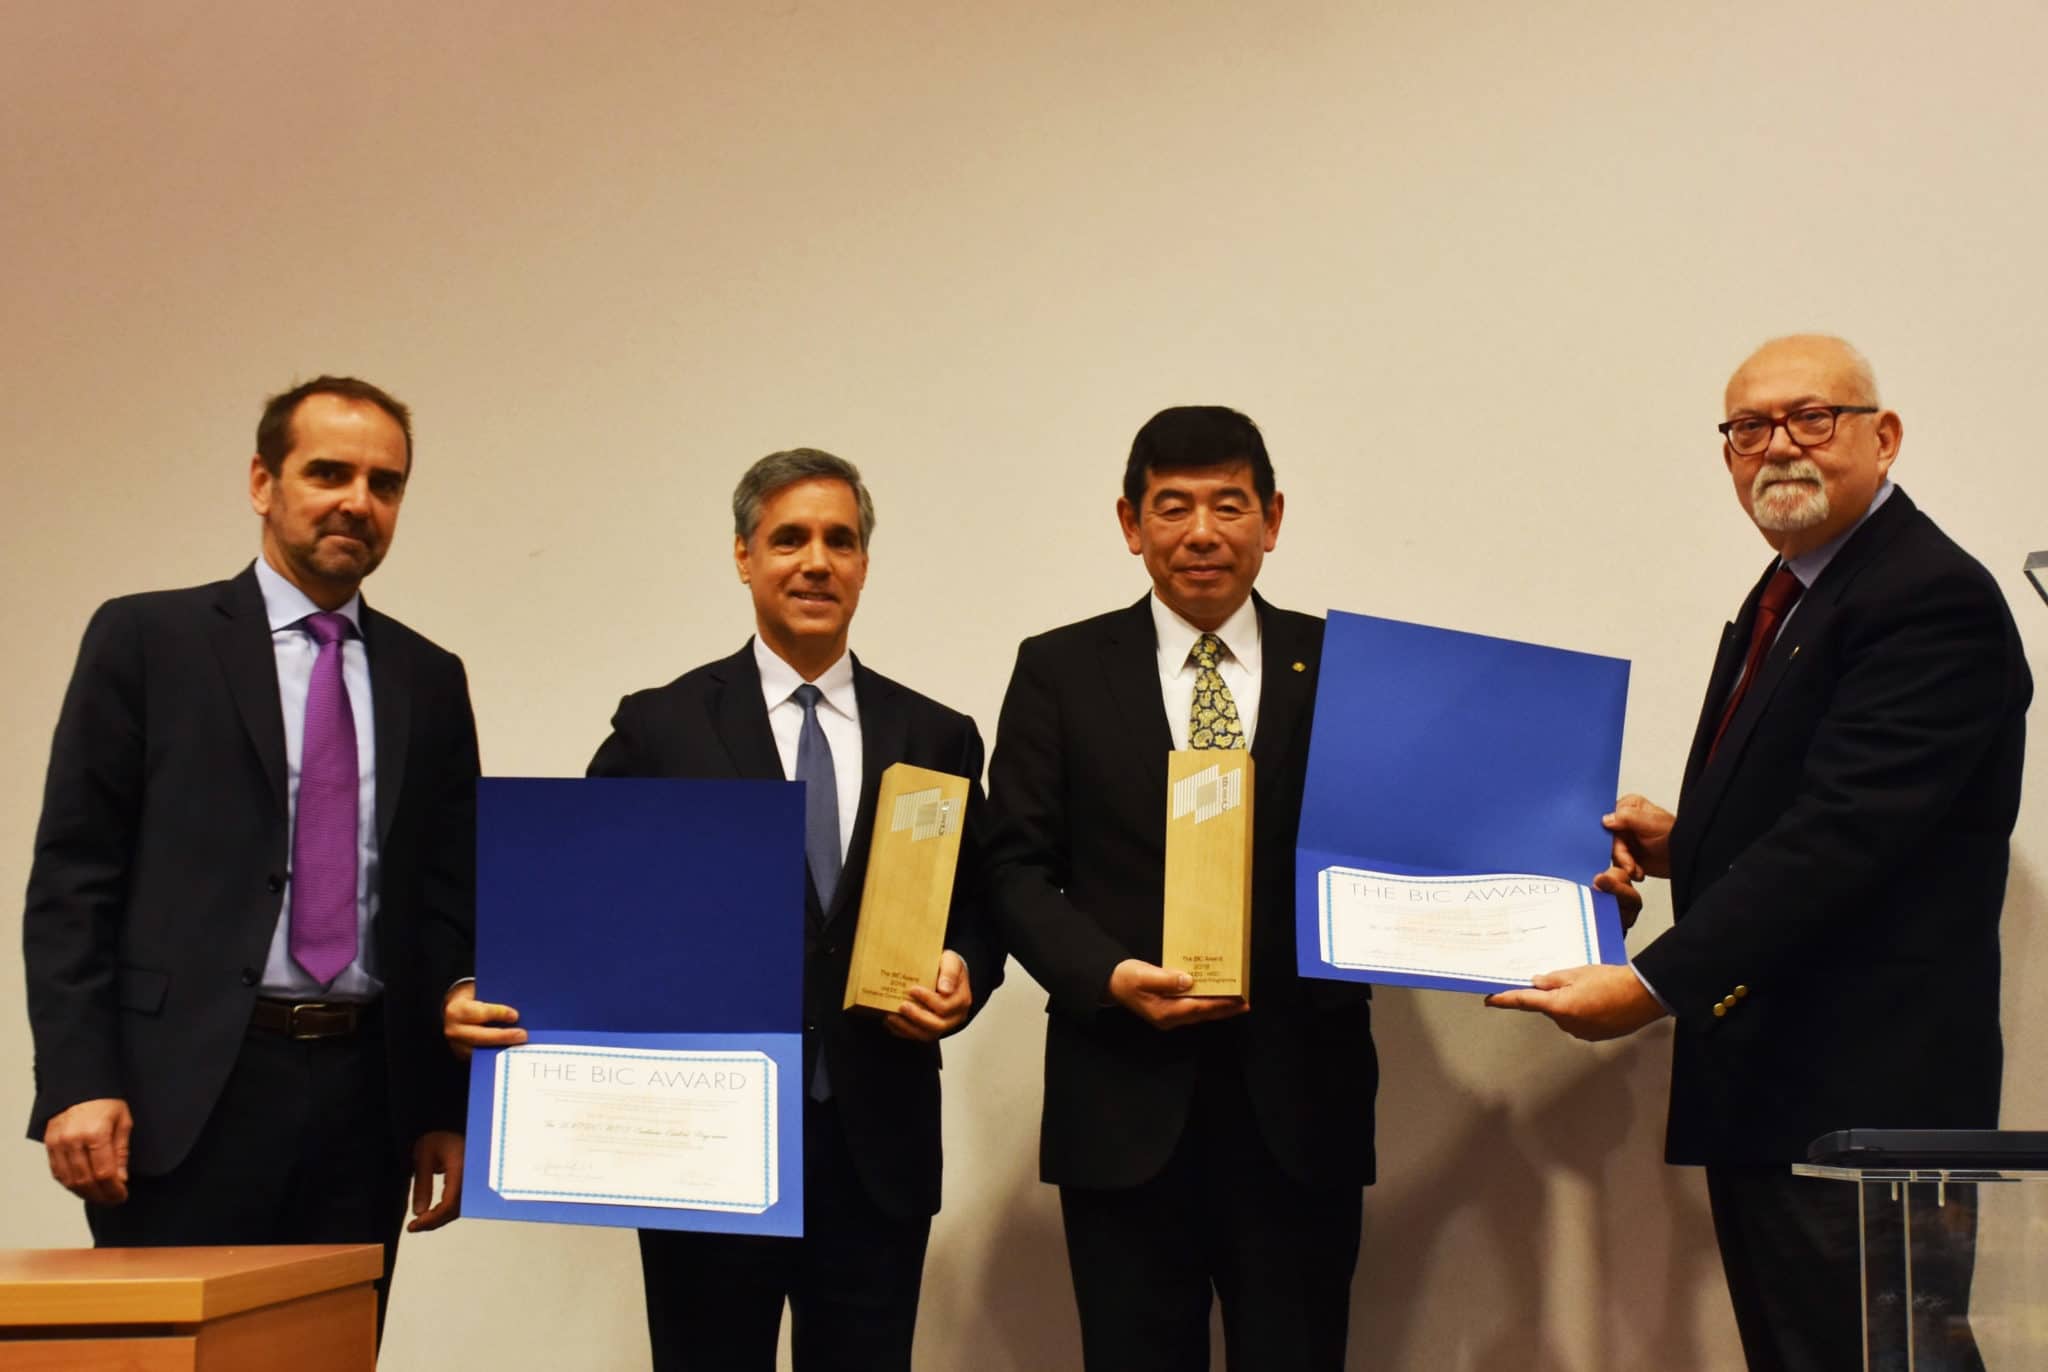 Container-Control-Programme-receives-BIC-Award